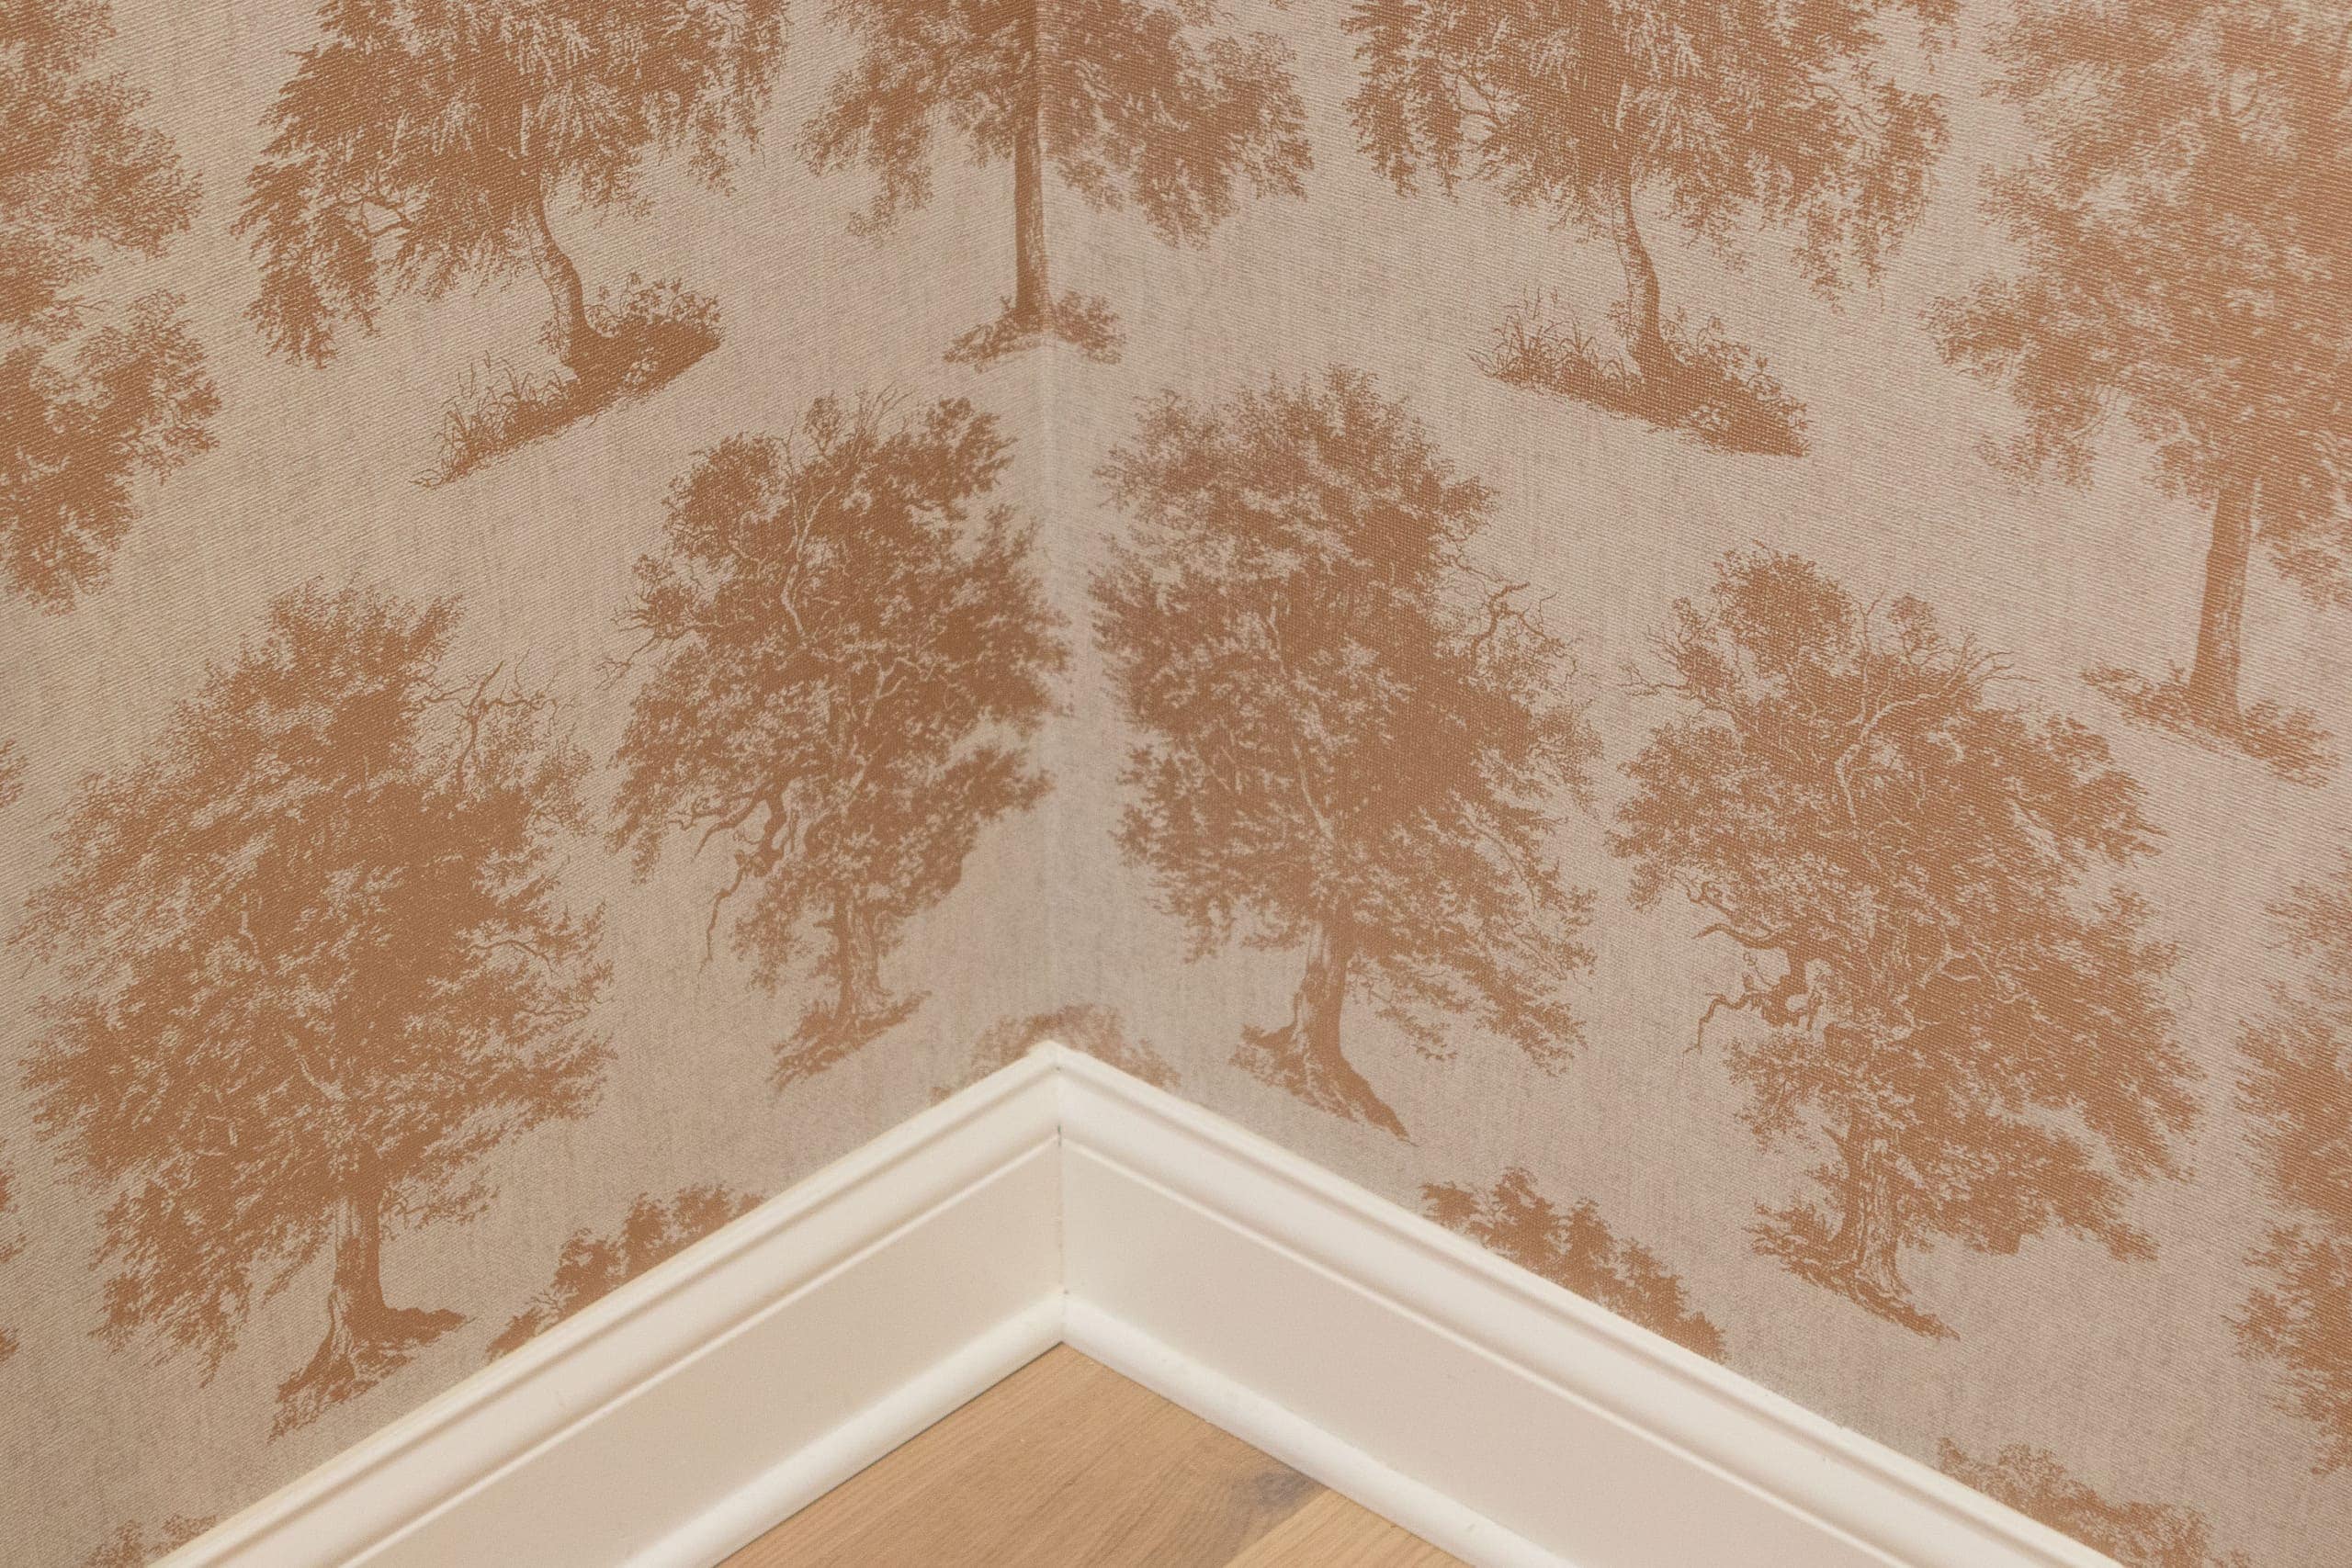 How to install wallpaper